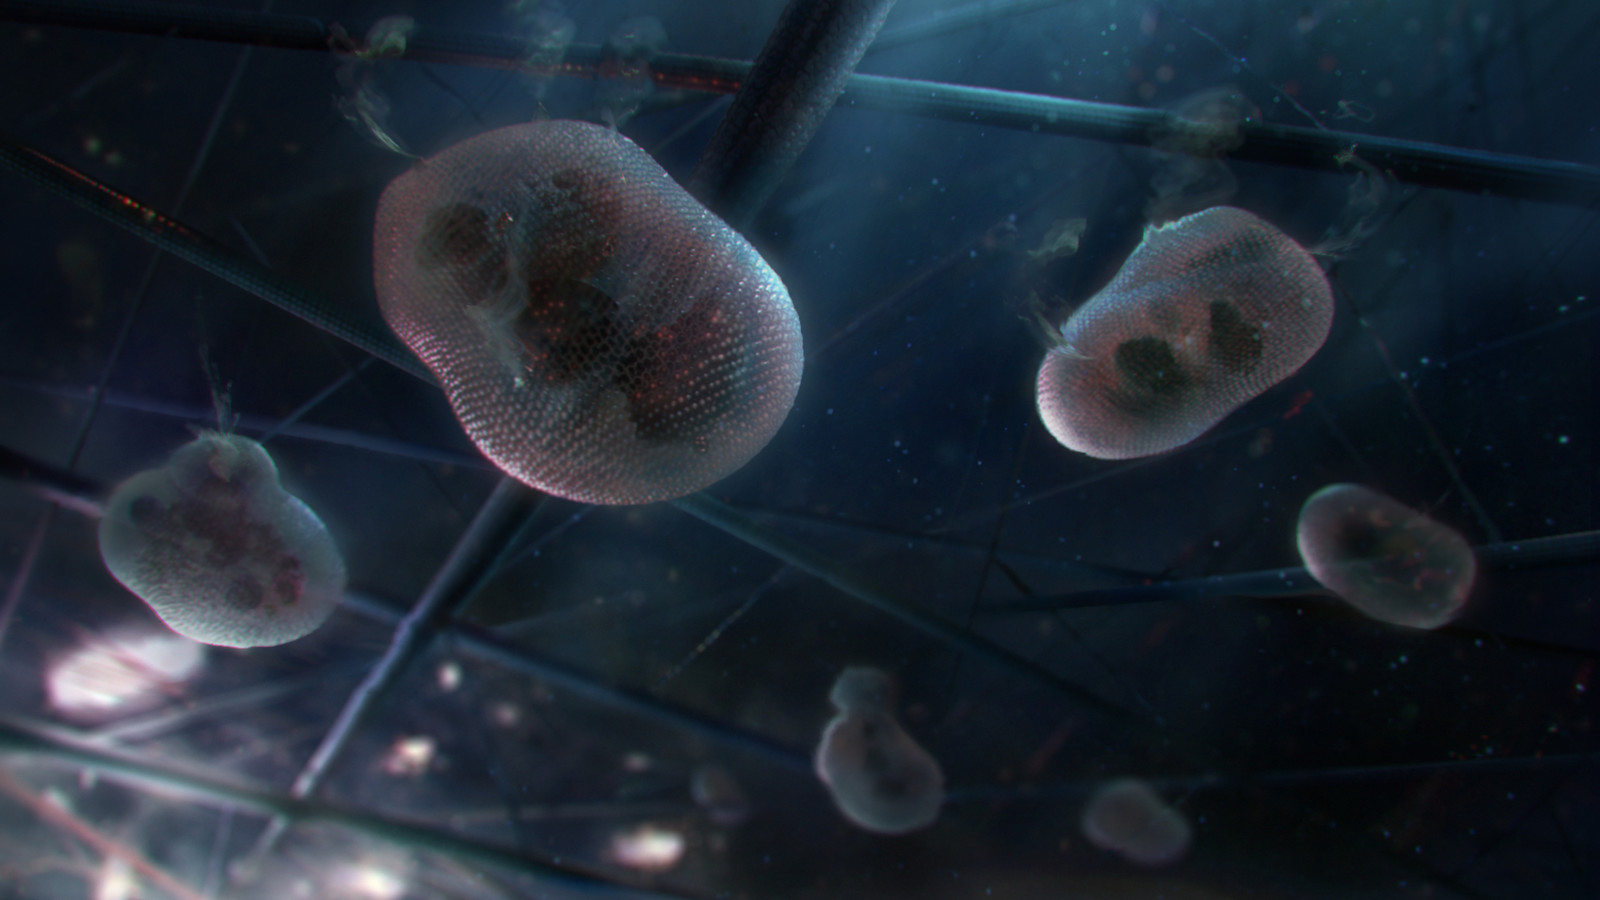  Our Secret Universe: The Hidden Life of the Cell (2012)